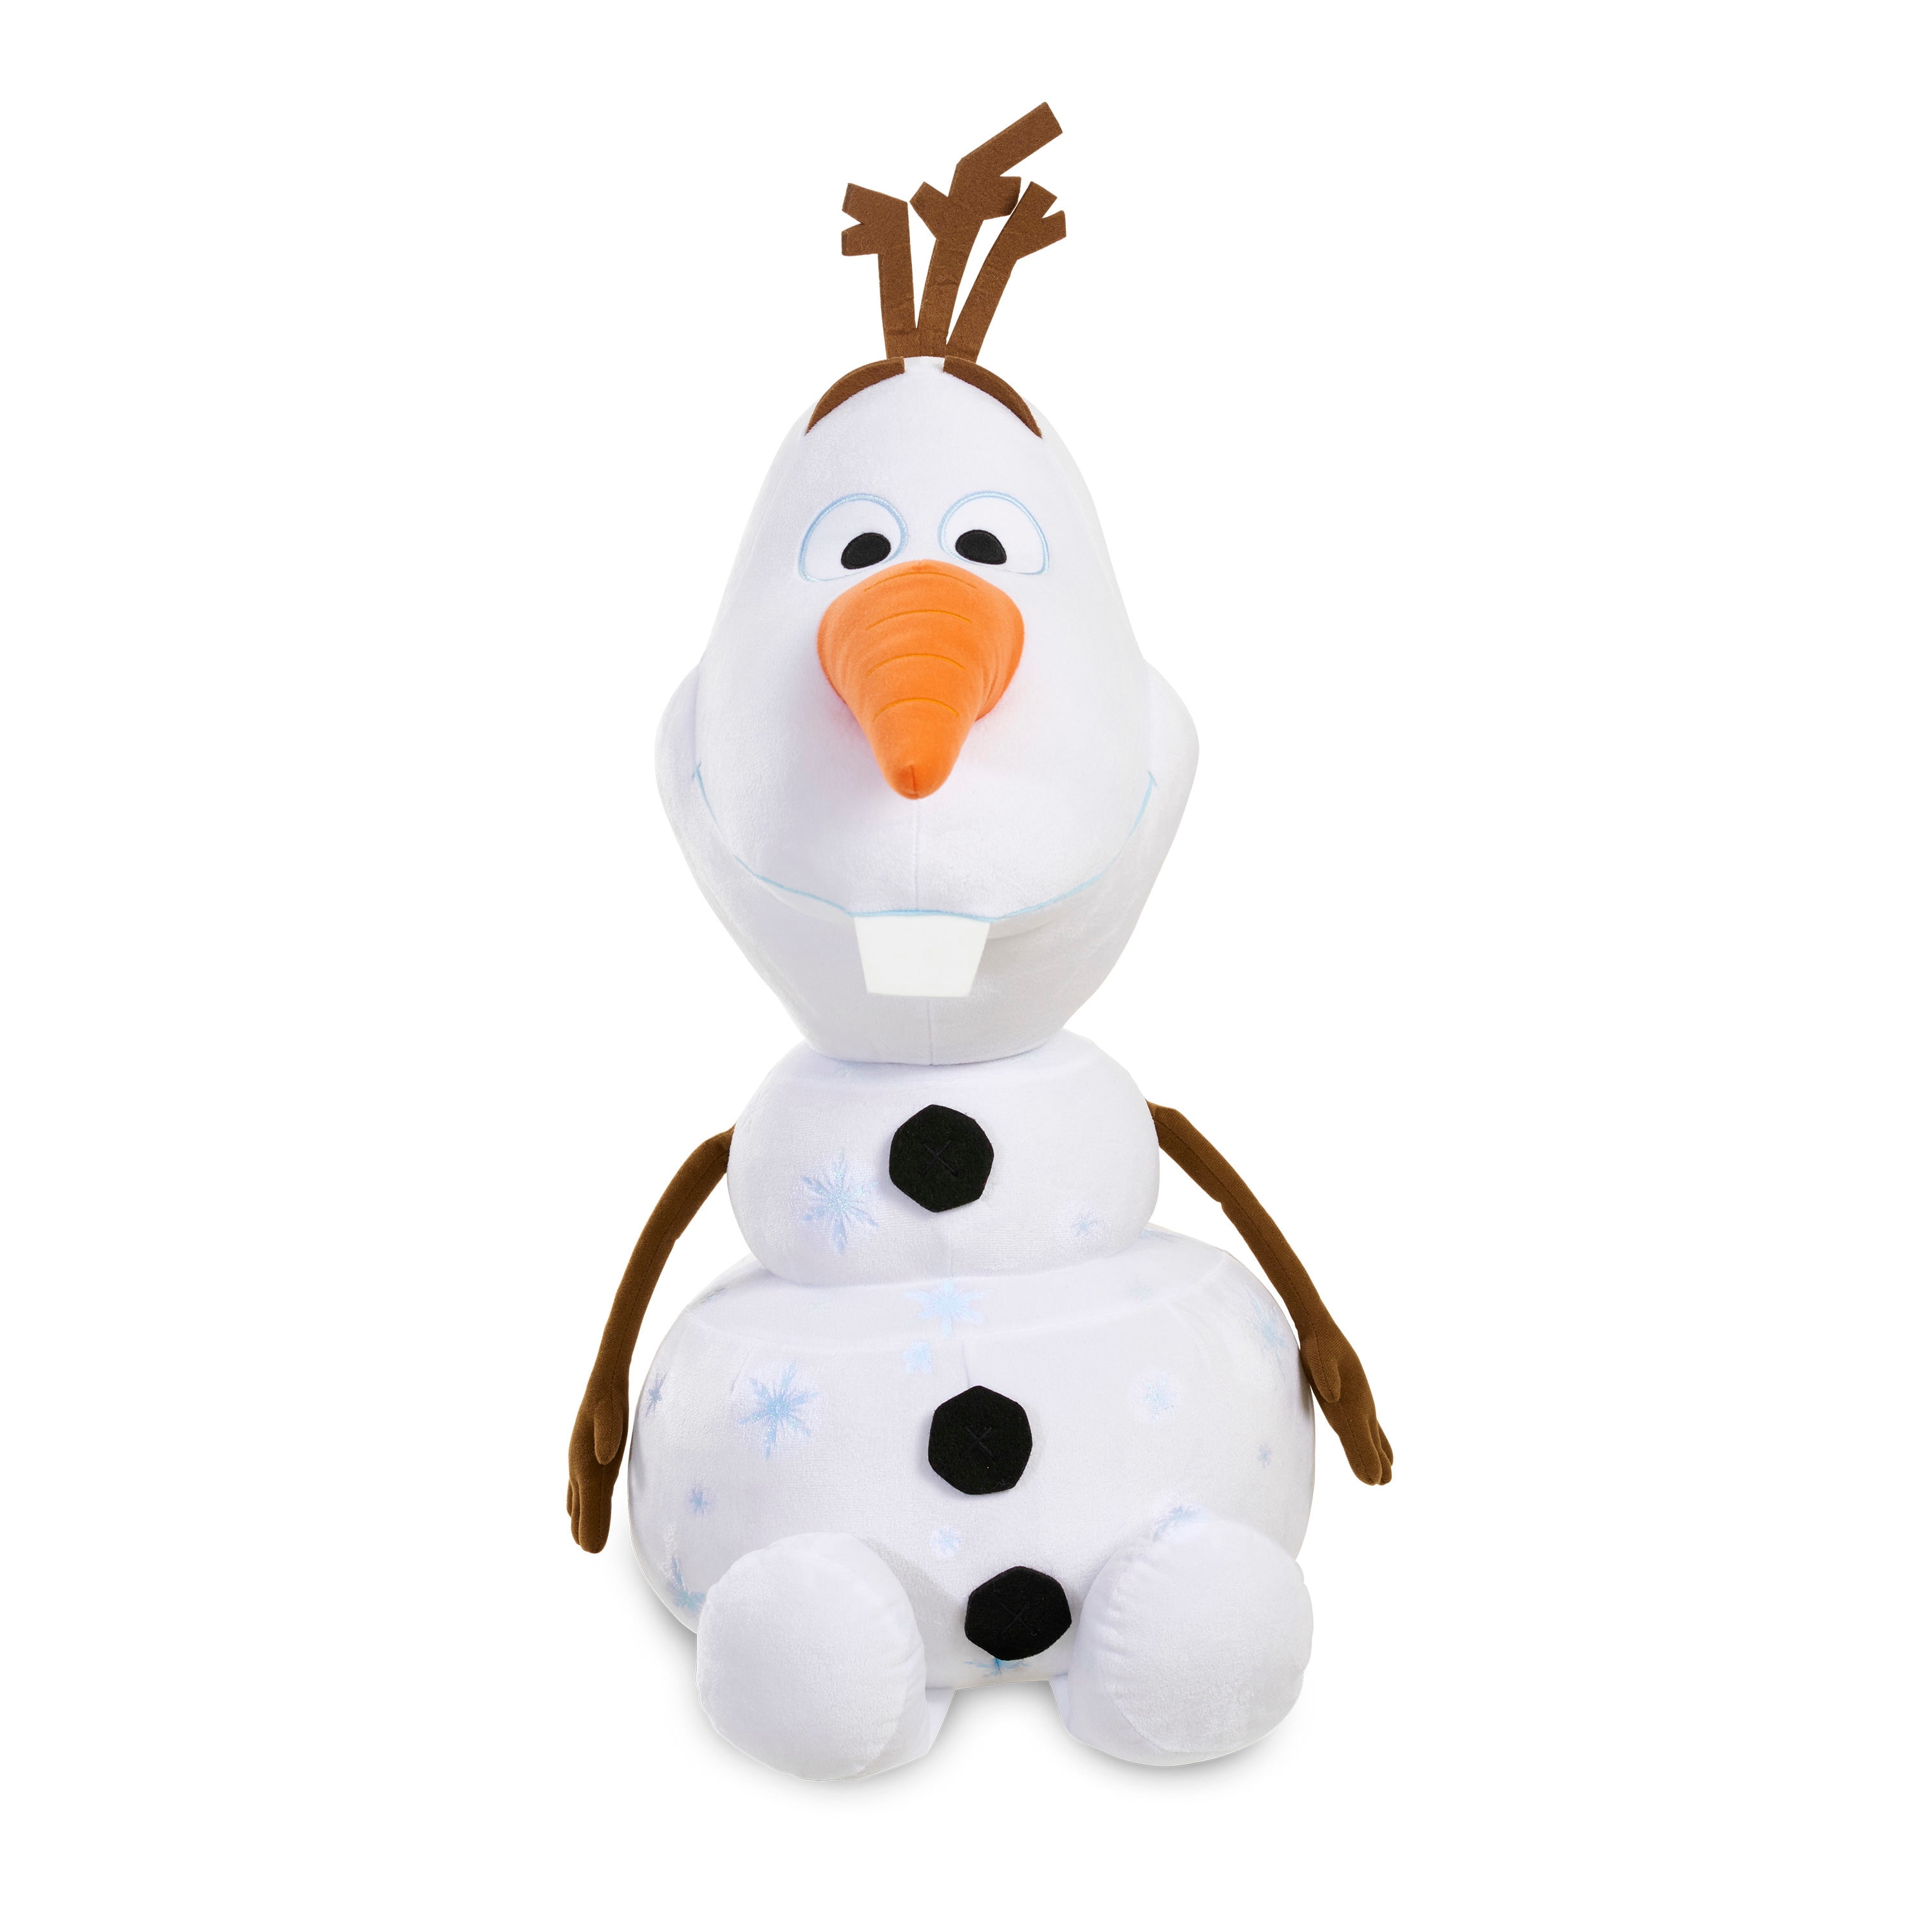 Disney Frozen 2 Small Plush Olaf Great Gift 78943 for sale online 